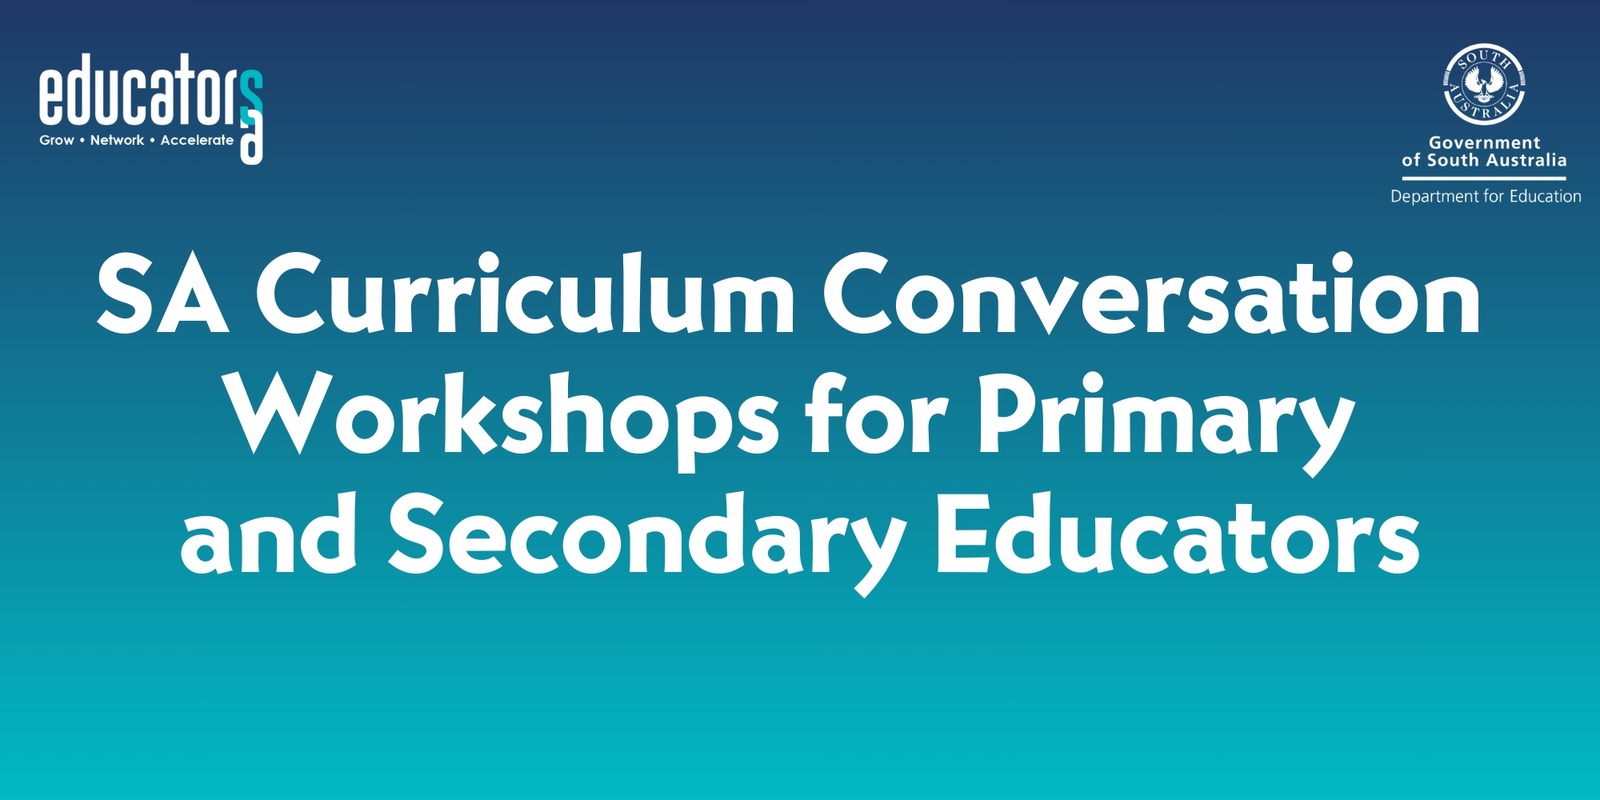 Banner image for SA Curriculum Conversation Workshops for Primary and Secondary Educators 